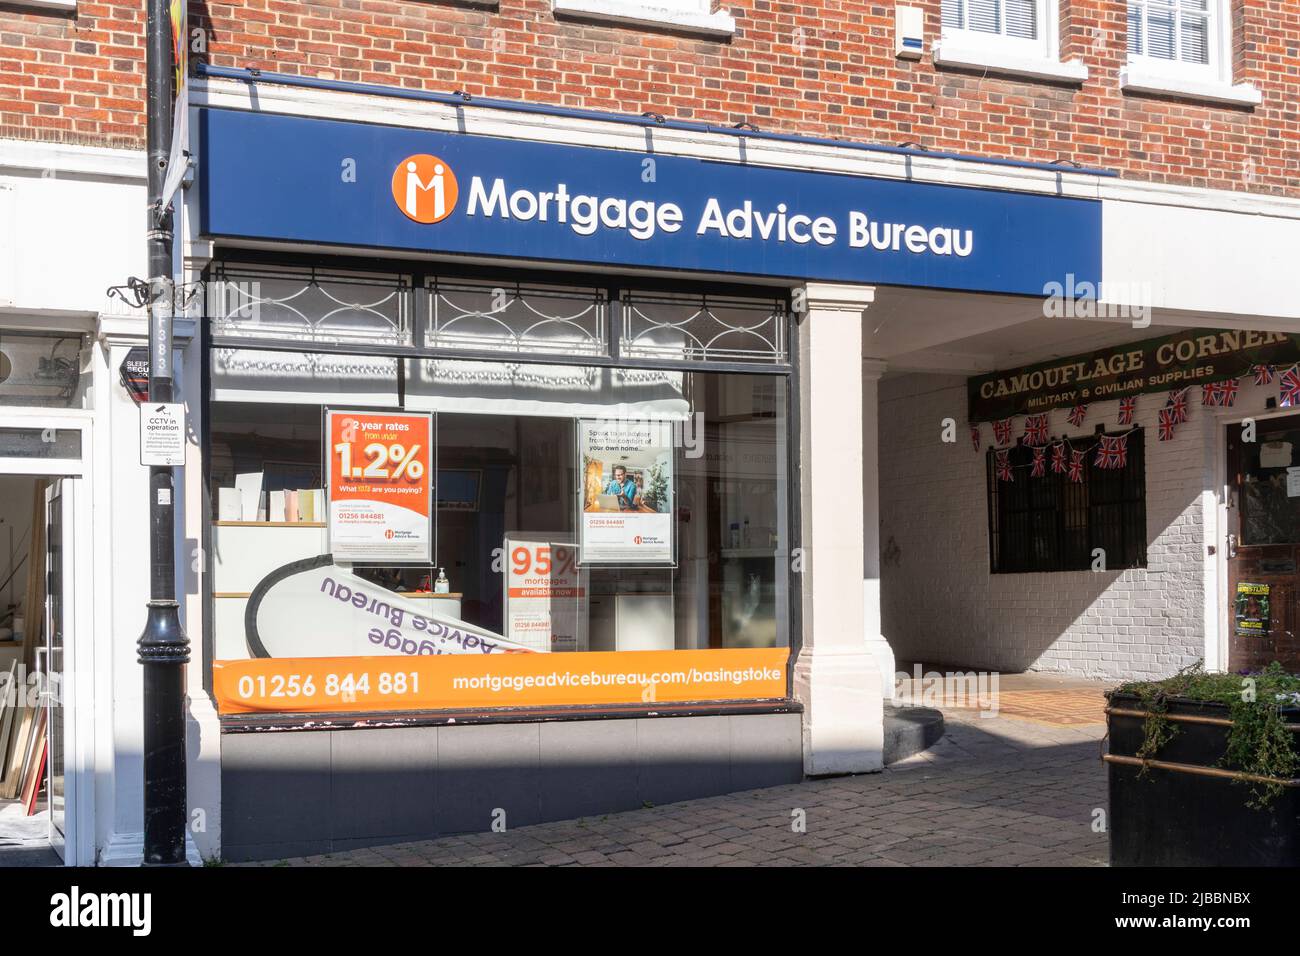 Shop front and logo for the Mortgage Advice Bureau on Church Street in Basingstoke. UK. Theme - mortgages, housing market, property market Stock Photo